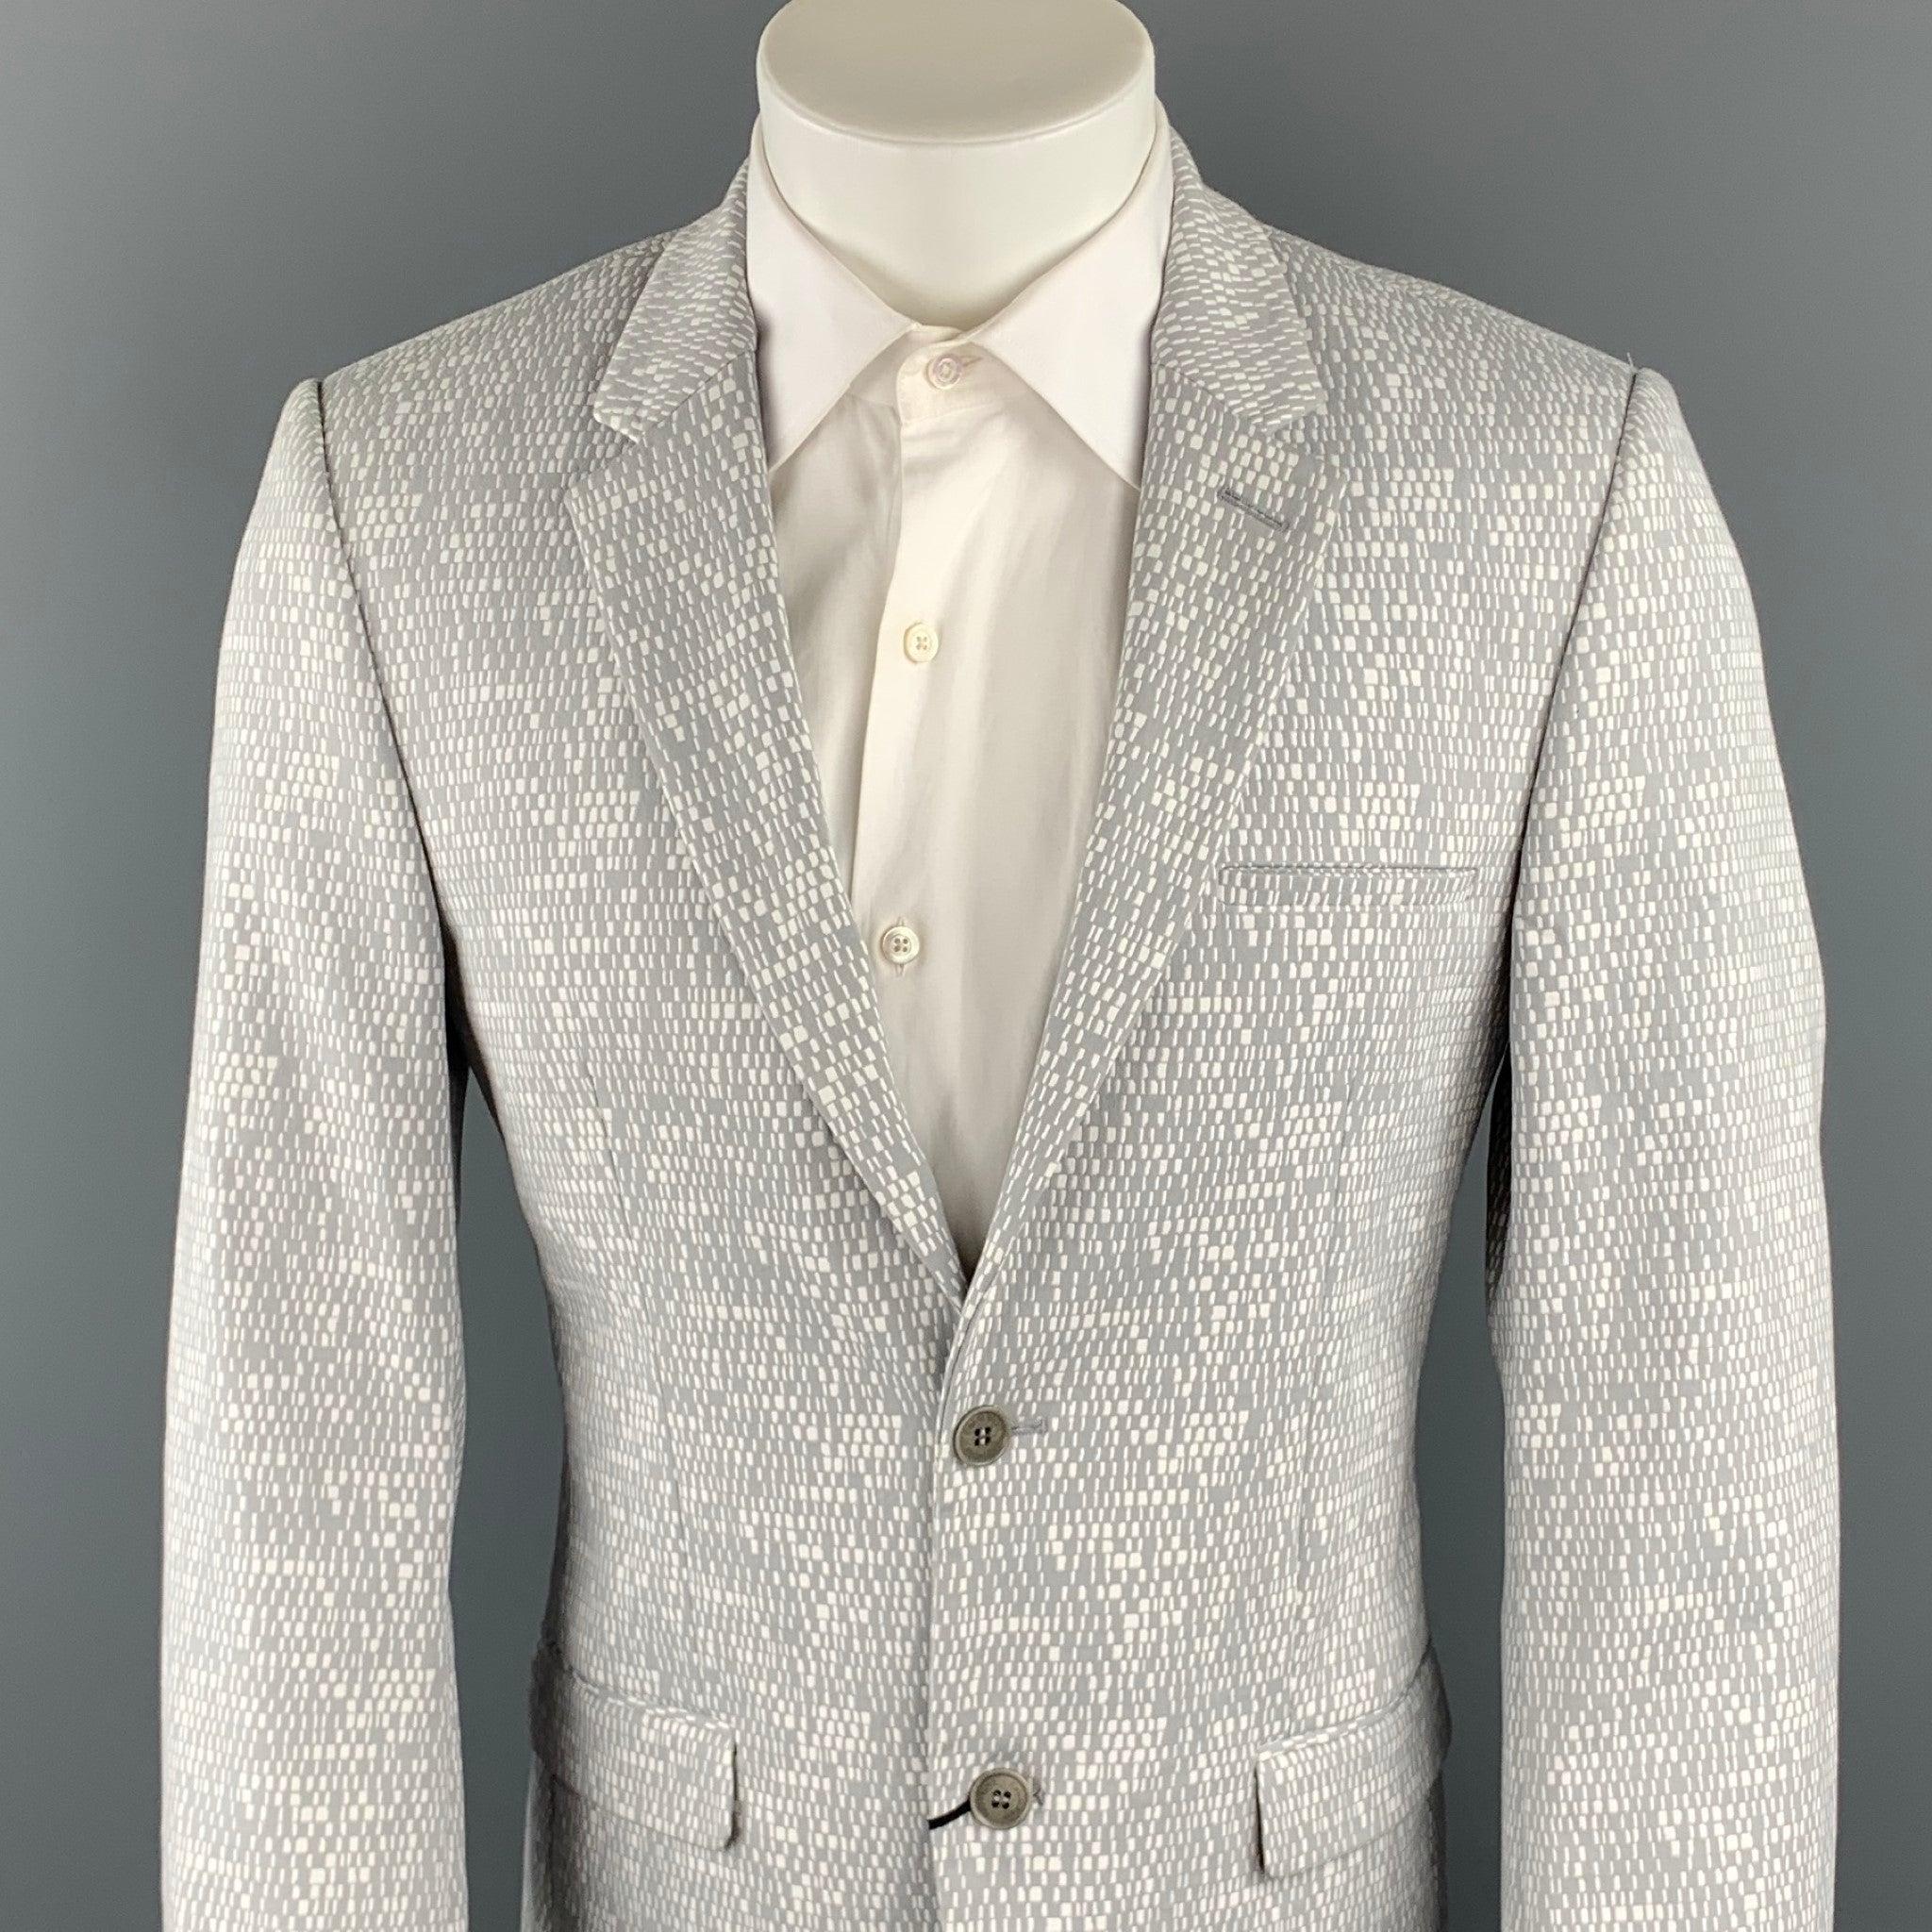 CALVIN KLEIN COLLECTION sport coat comes in a gray & white woven cotton blend with a full liner featuring a notch lapel, flap pockets, and a two button closure.New With Tags. 

Marked:   46/36 

Measurements: 
 
Shoulder: 17.5 inches 
Chest: 38